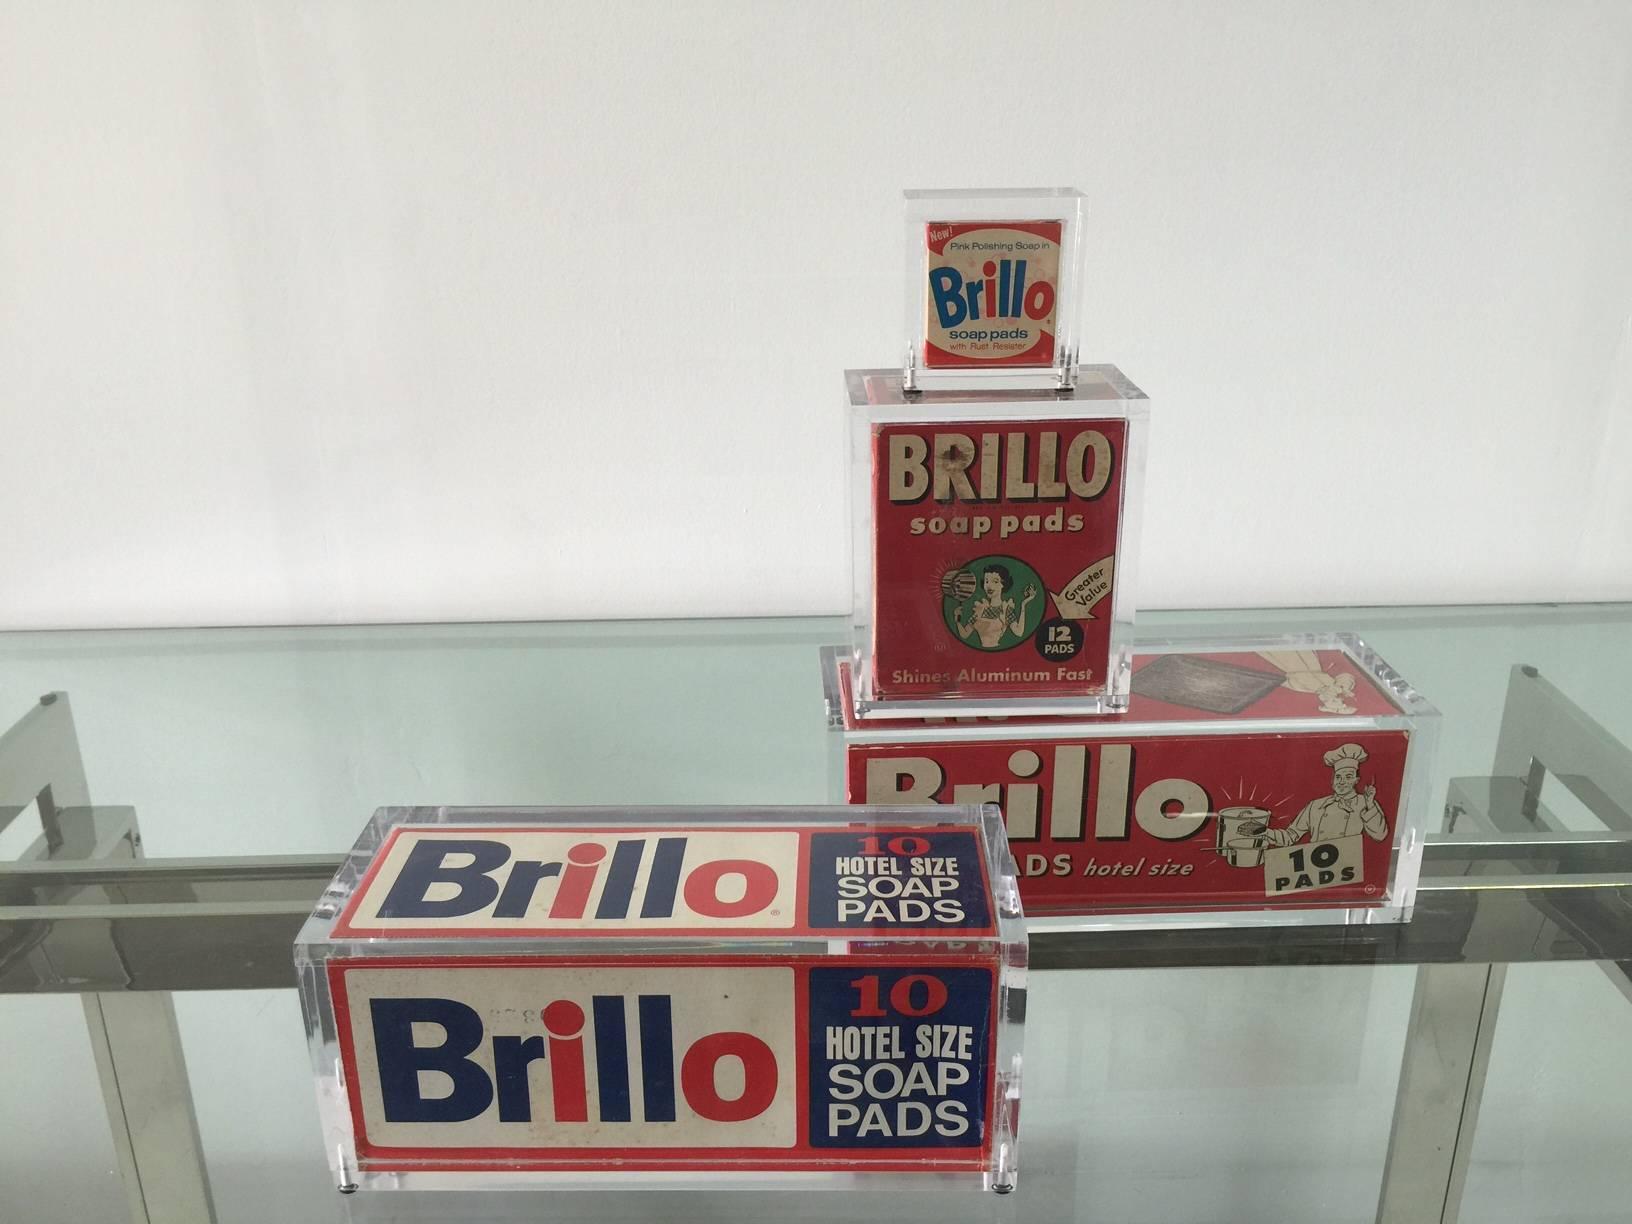 This vintage Brillo box grouping is beautifully displayed in gallery quality acrylic boxes. The collection is inspired by Warhol's fascination for American household items. The boxes are vintage and show signs of age.

Measures: Largest (blue and